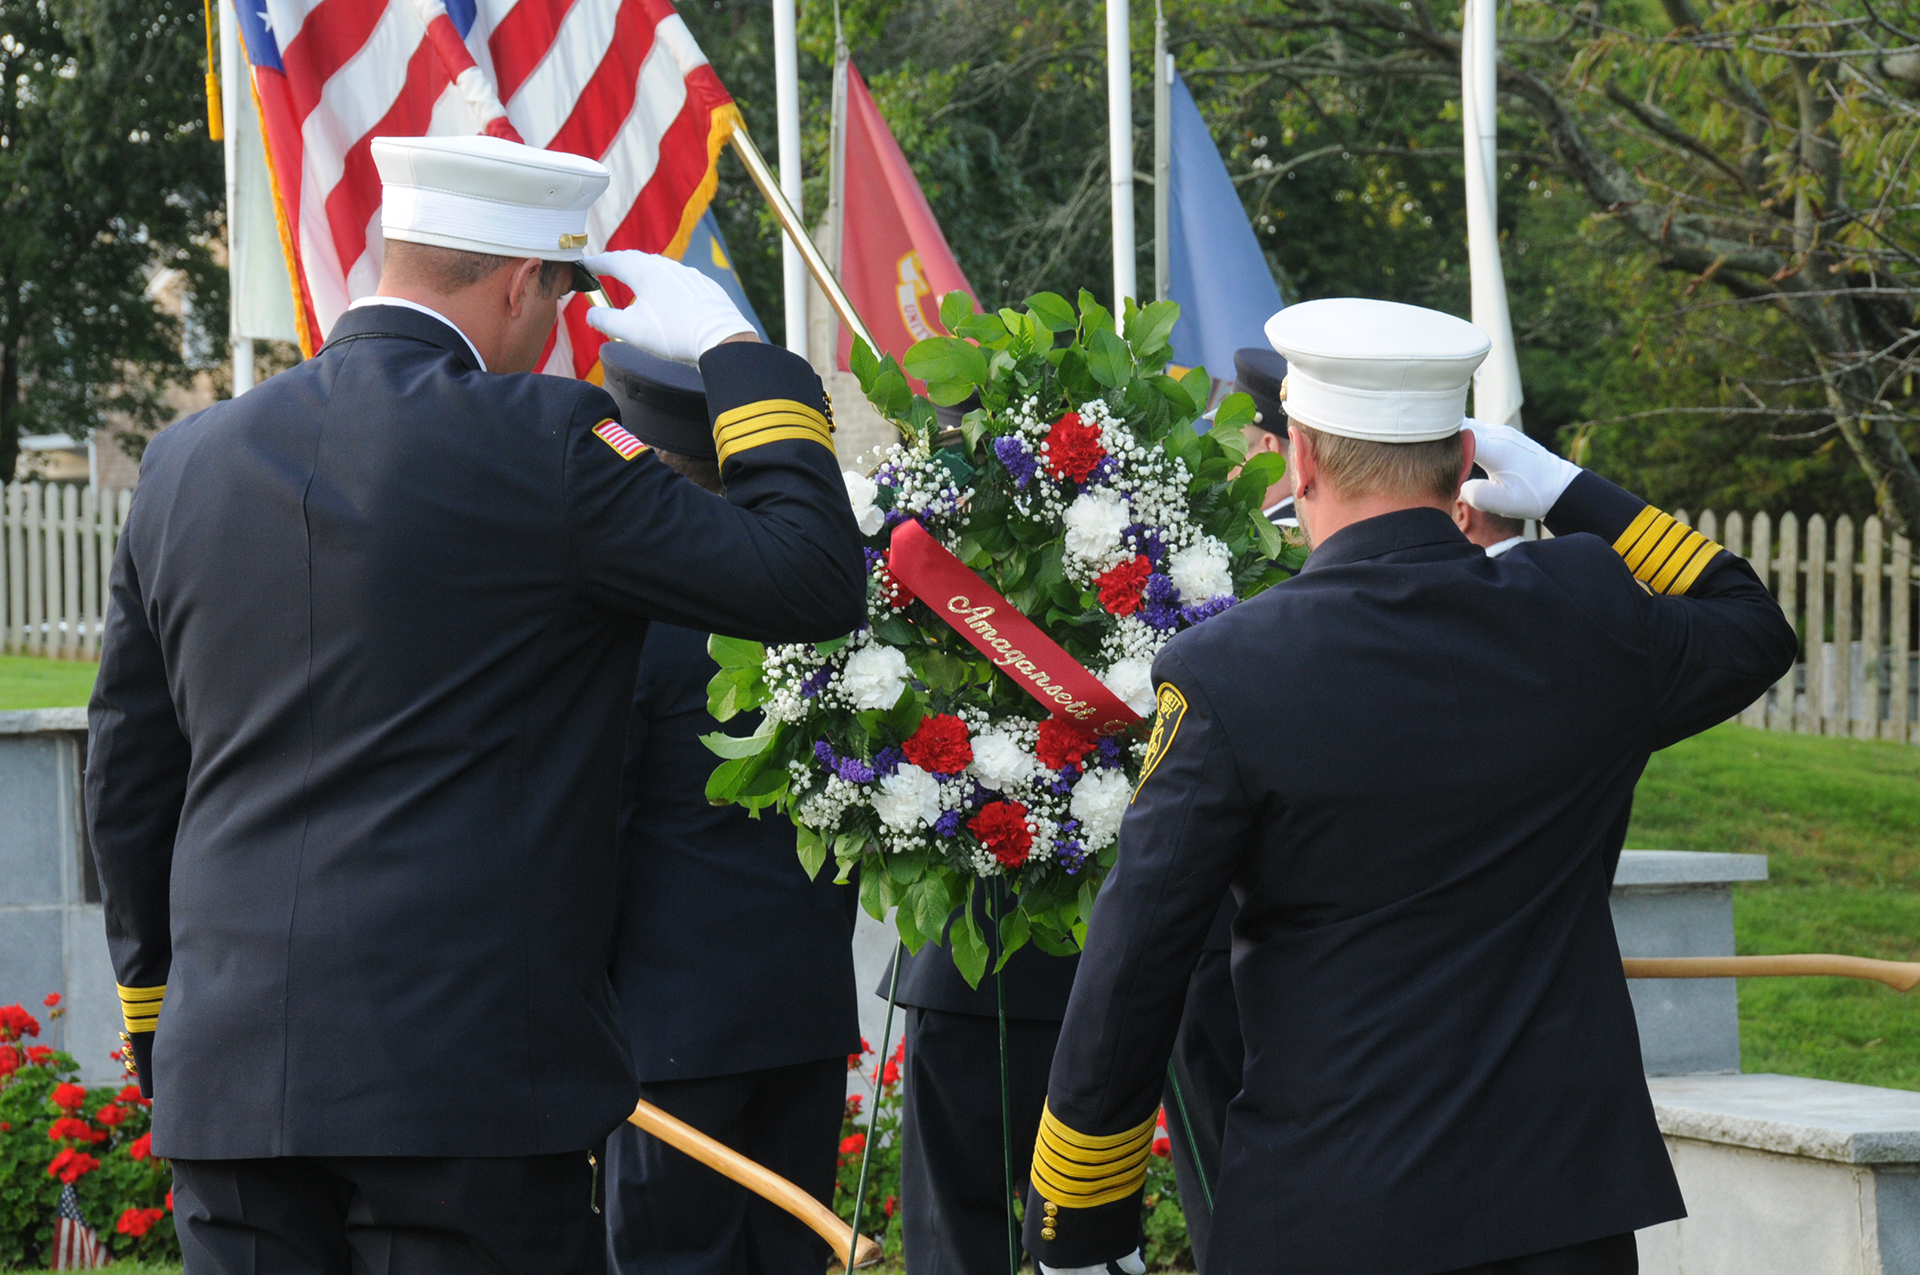 FIRE CHIEFS SALUTE AT THE EAST HAMPTON 9/11 MEMORIAL IN 2019. PHOTO BYRICHARD LEWIN